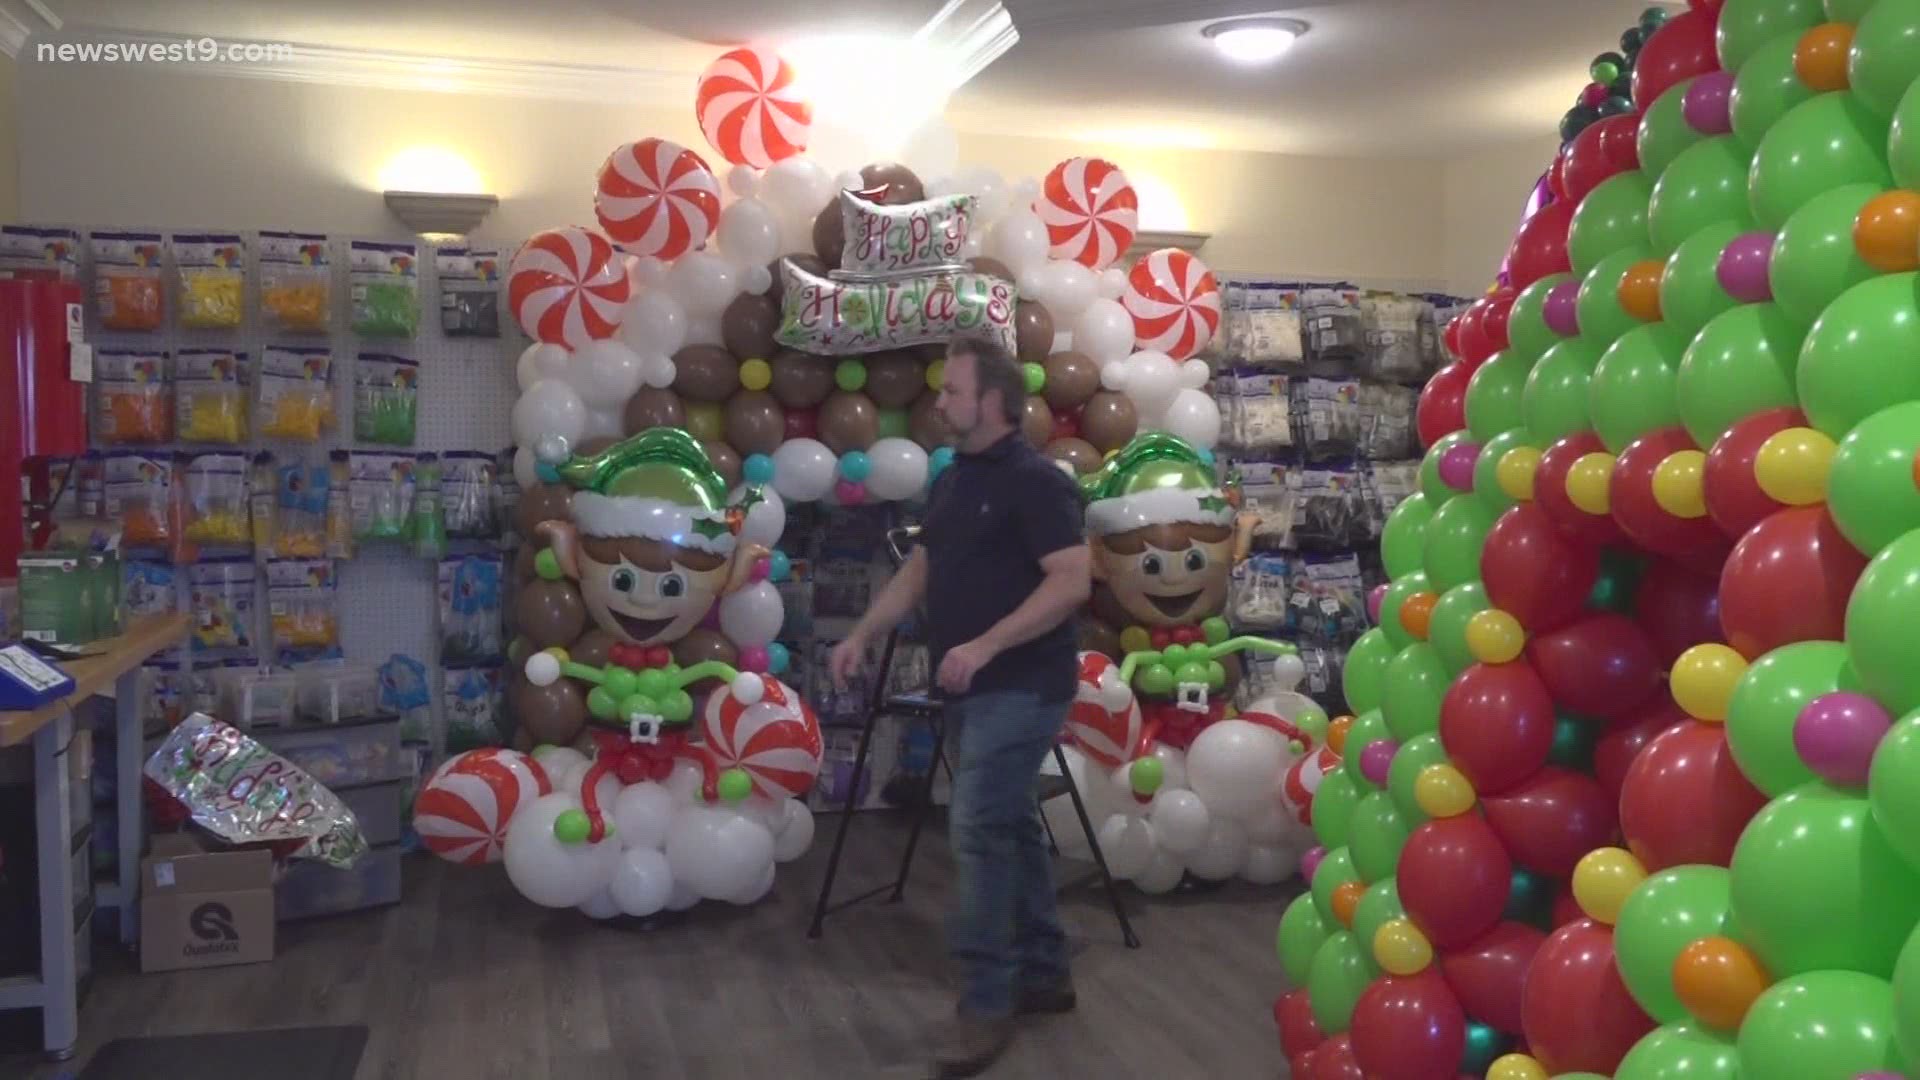 Balloon artist, Cody Williams plans to round out the year with one final display on New Years Eve.